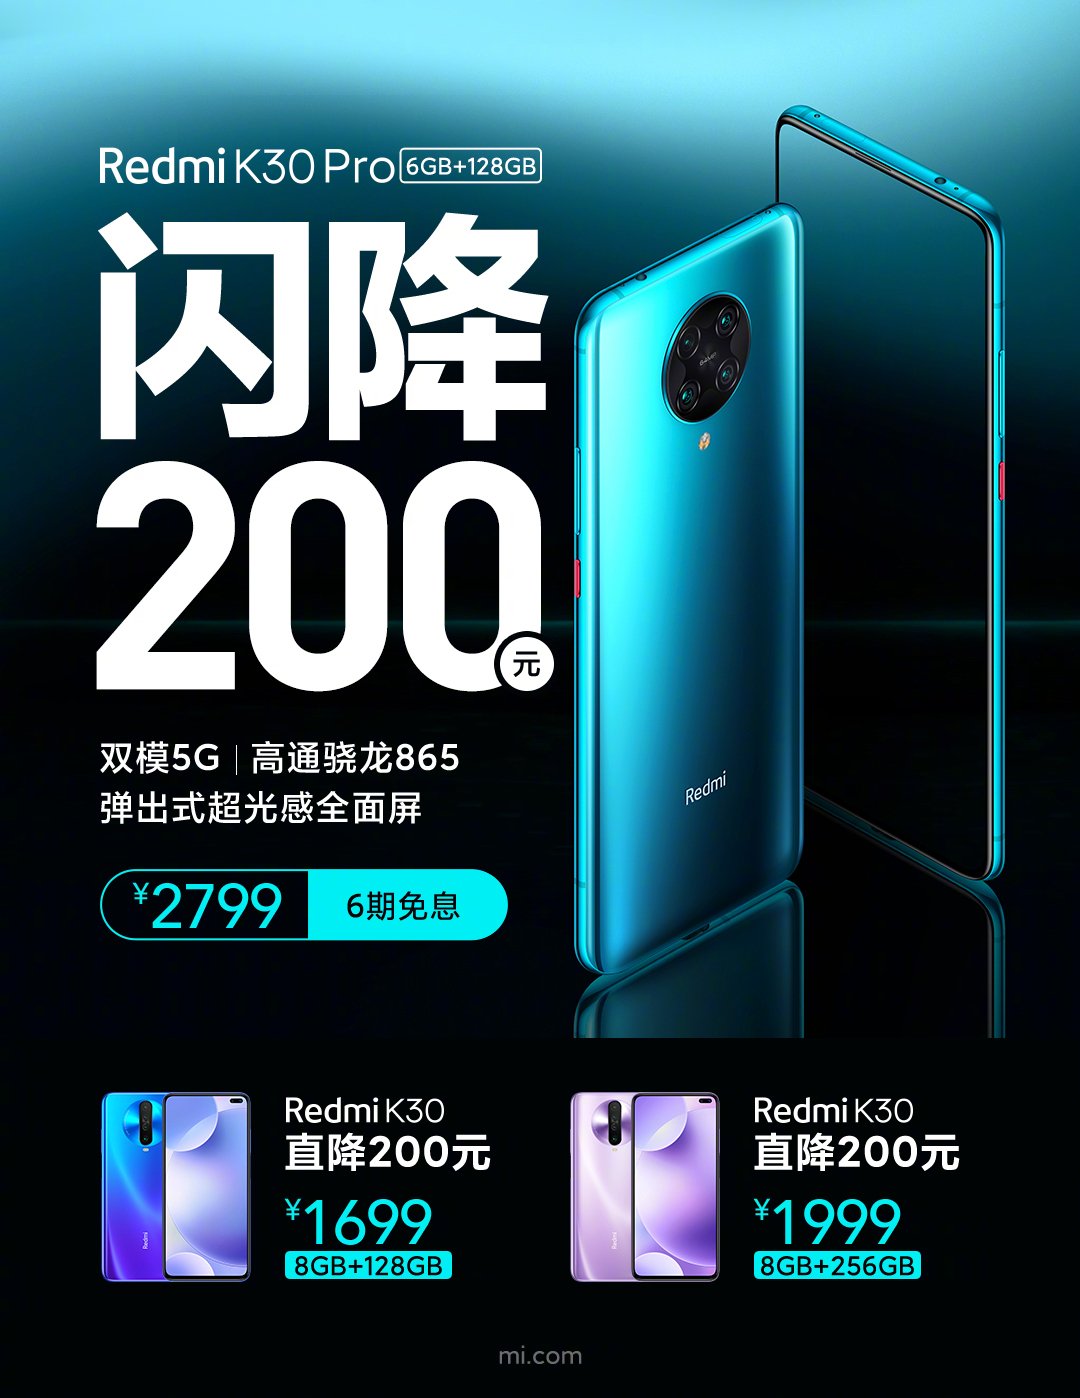 Redmi K30 and K30 Pro prices slashed